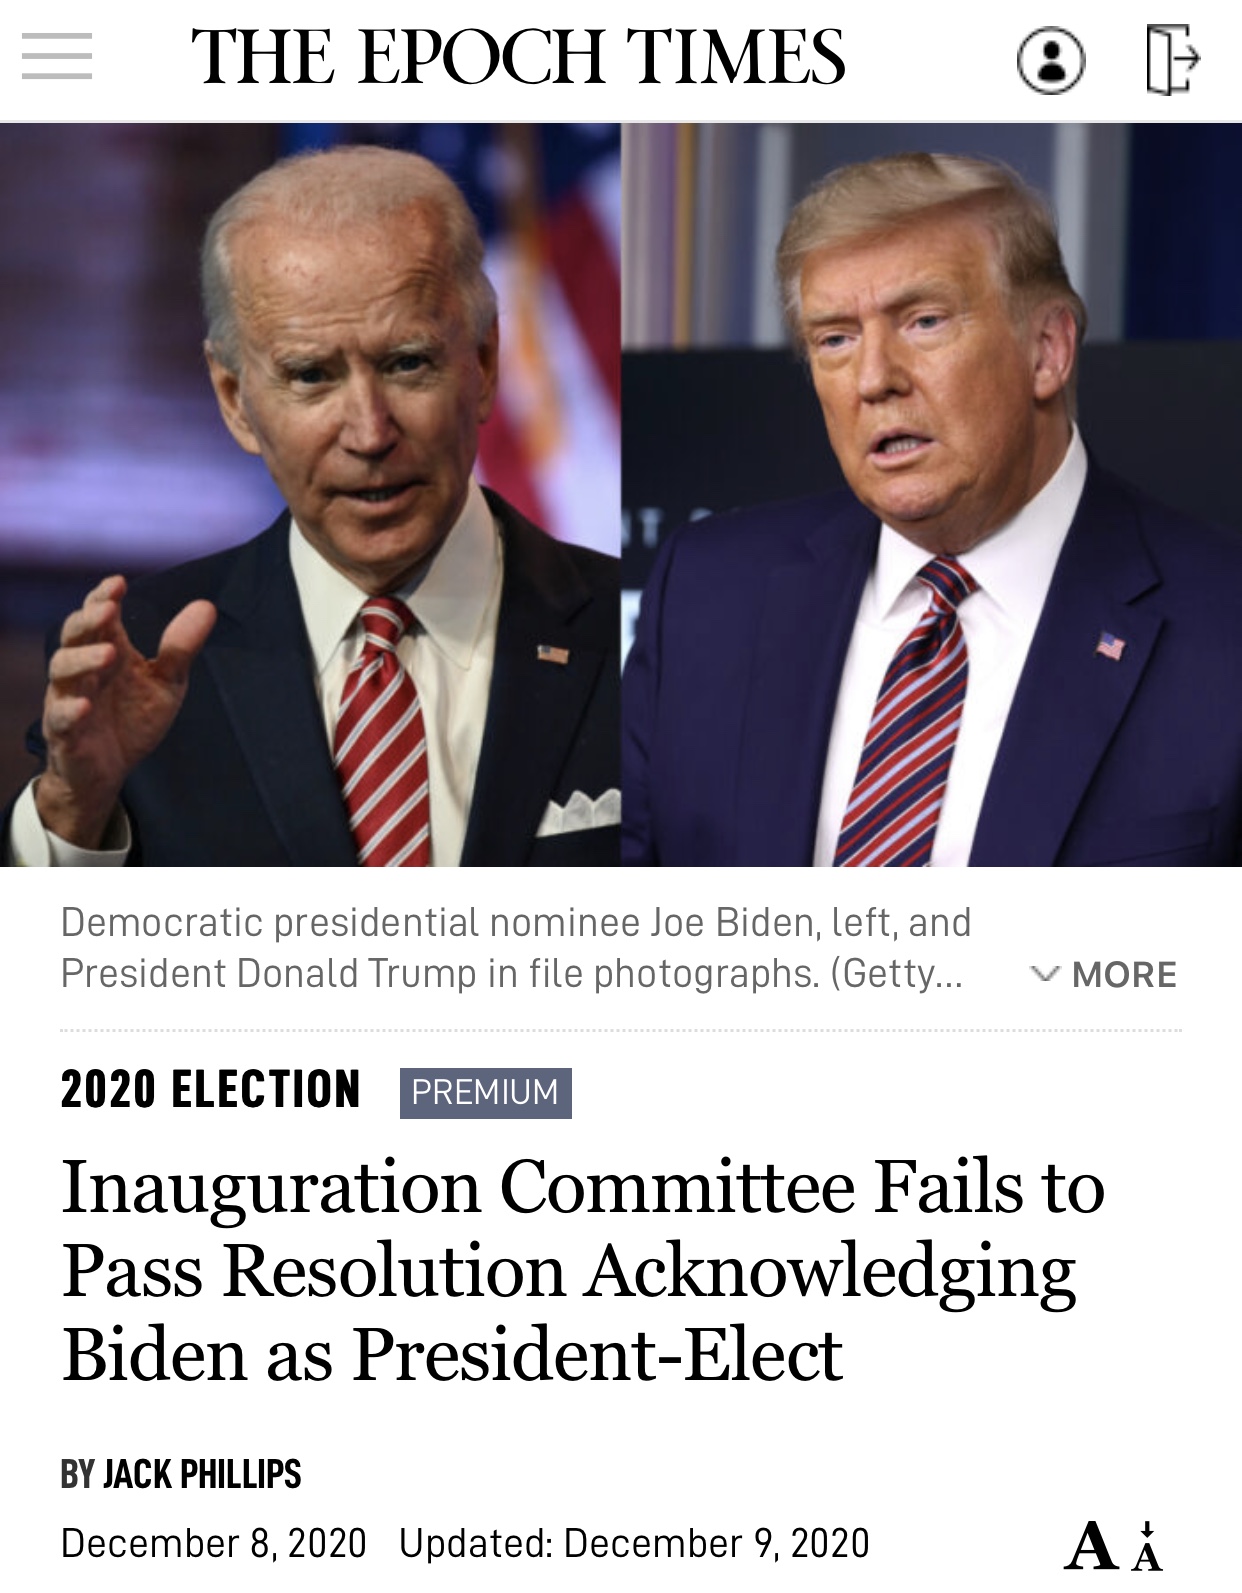 Inauguration Committee Fails to Pass Resolution Acknowledging Biden as President-Elect